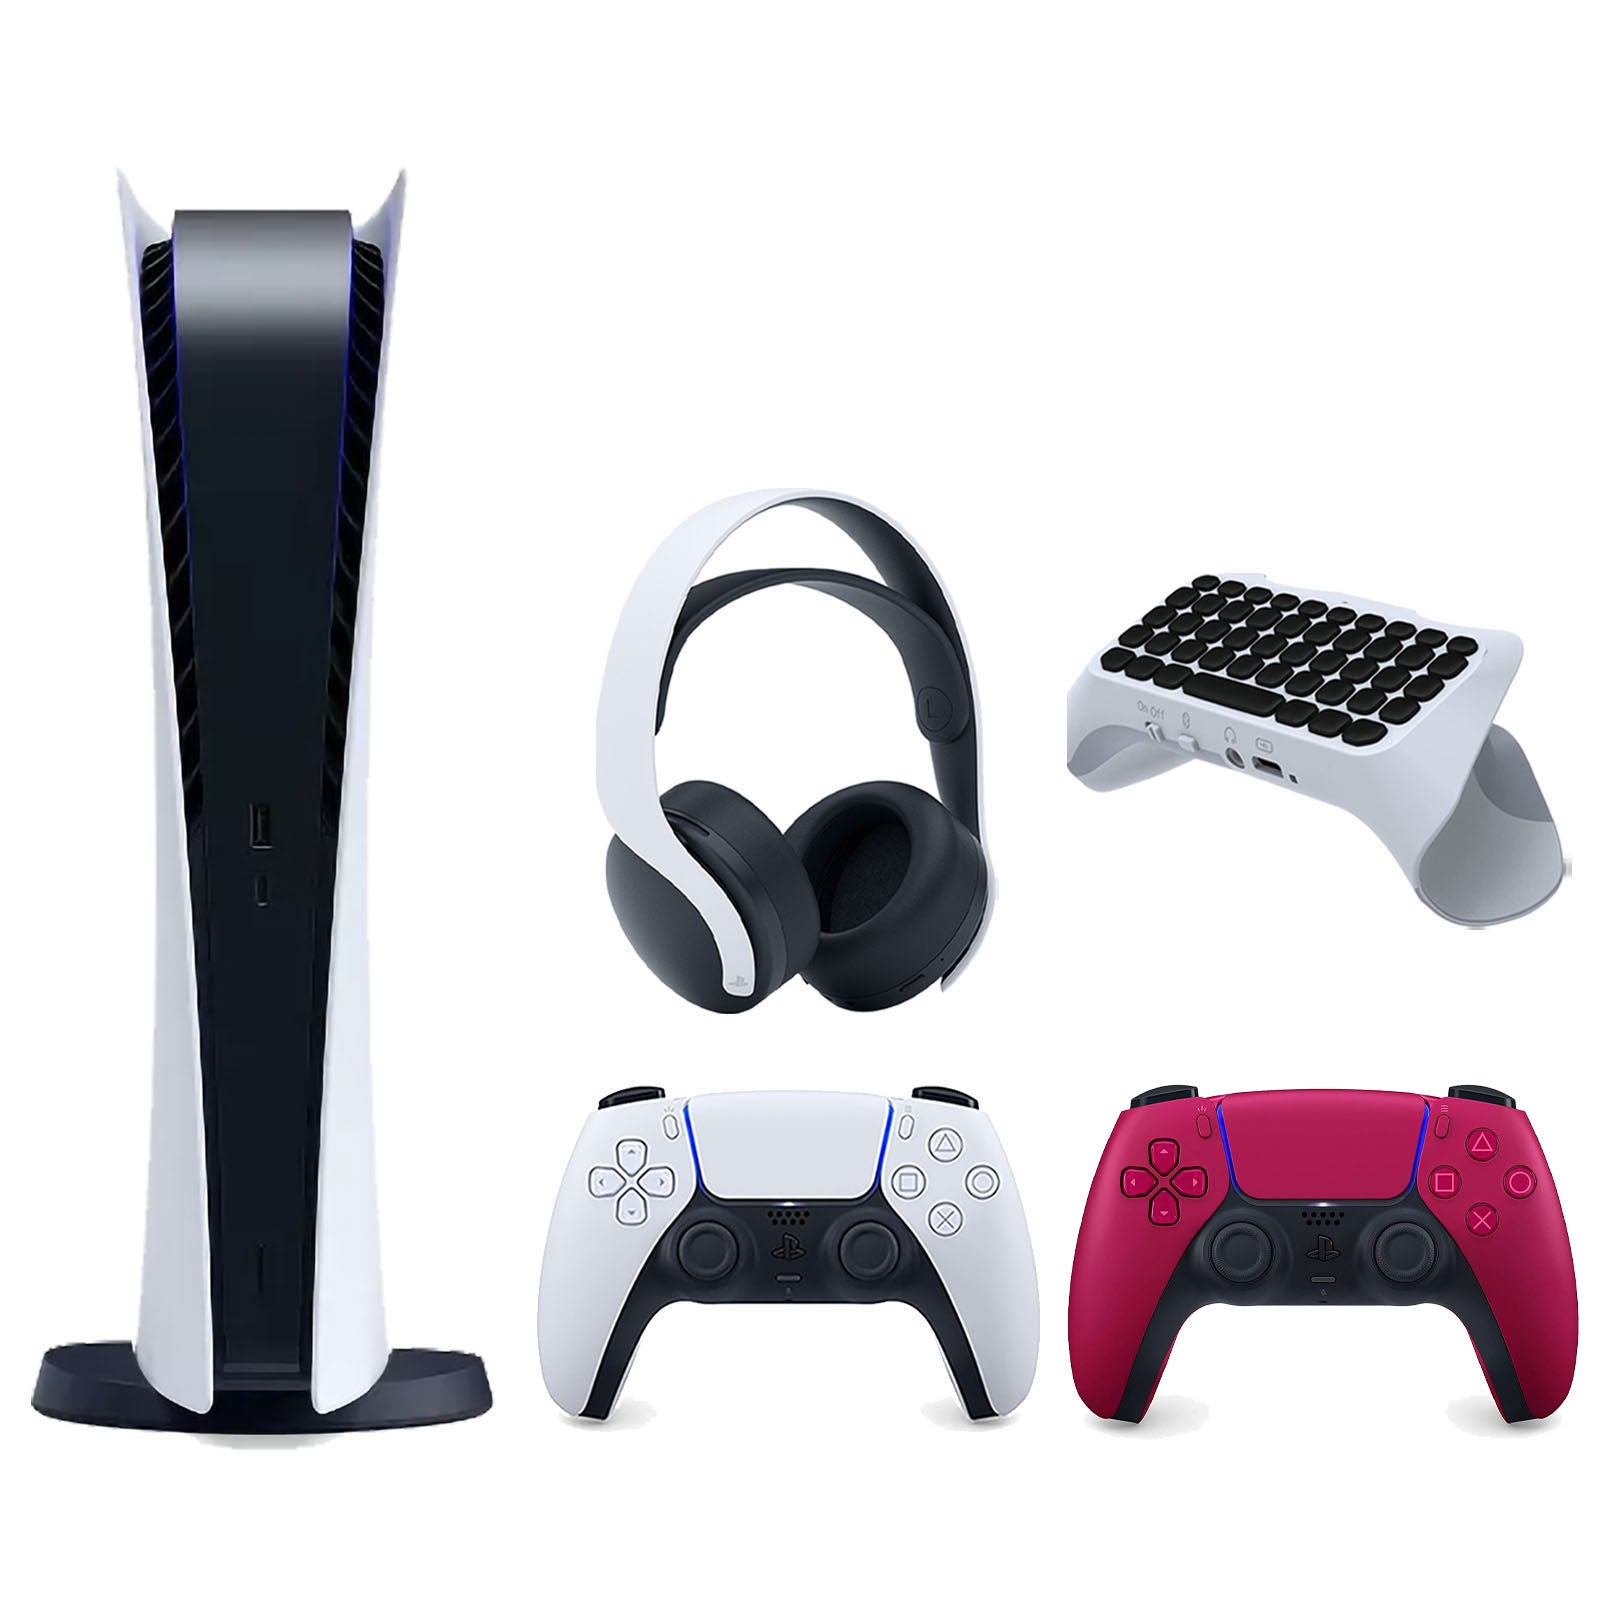 Sony Playstation 5 Digital Edition Console with Extra Red Controller, White PULSE 3D Headset and Surge QuickType 2.0 Wireless PS5 Controller Keypad Bundle - Pro-Distributing